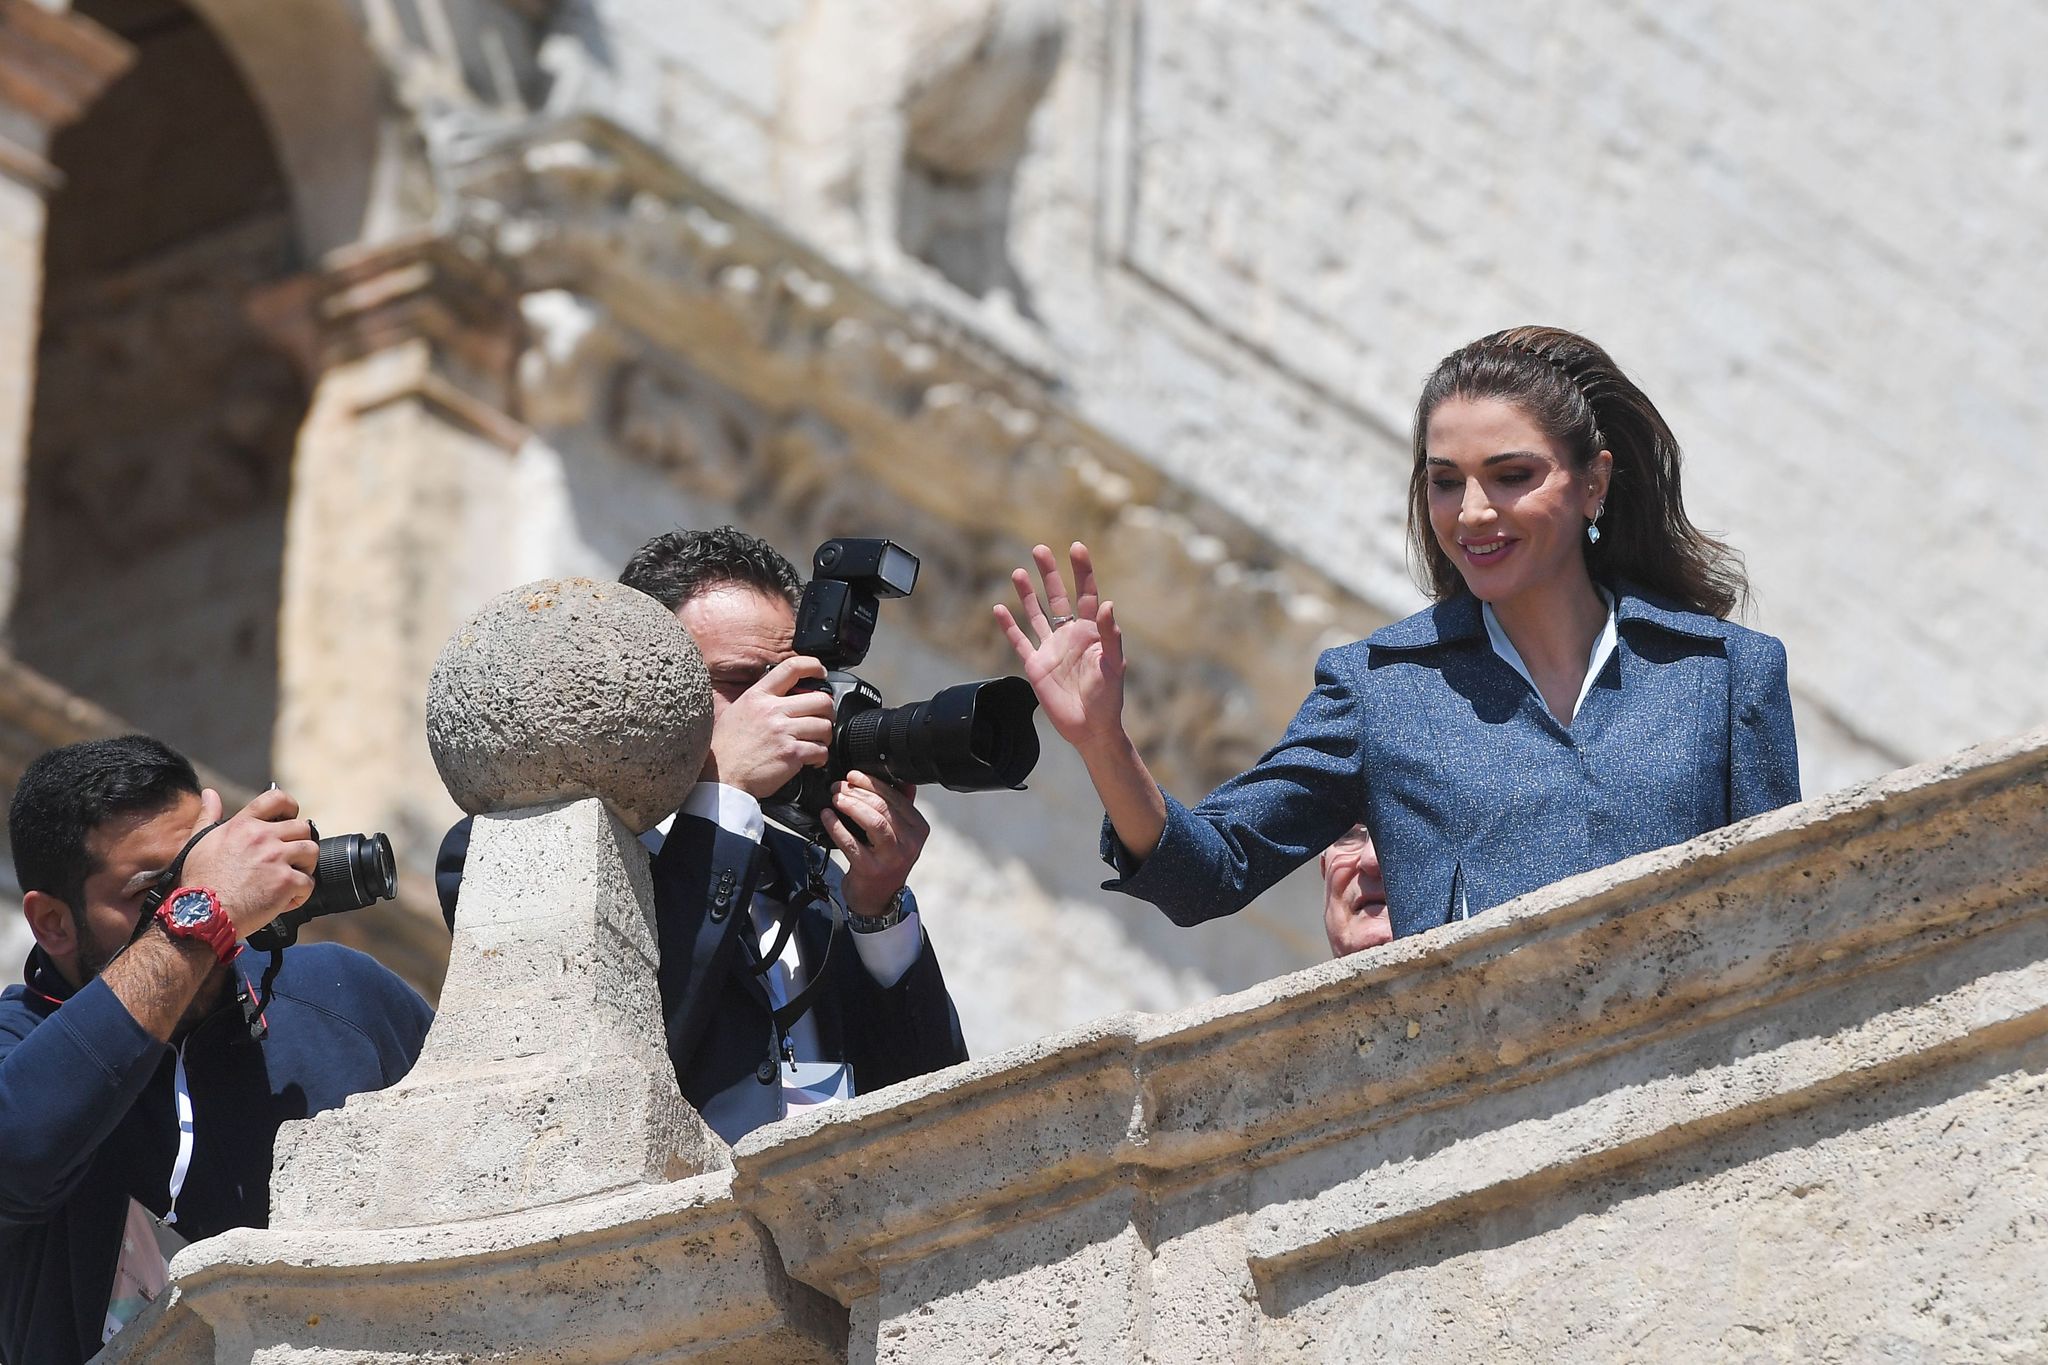 queen rania of jordan r waves upon her arrival for a ceremony at the basilica of st francis of assisi, on march 29, 2019 in assisi, to hand the lamp of the peace of st francis, the catholic nobel to jordans king   king of jordan, abdullah ii receives the lamp of the peace of st francis, the catholic nobel during a ceremony the basilica of st francis of assisi, on march 29, 2019 in assisi  photo by tiziana fabi  afp        photo credit should read tiziana fabiafp via getty images